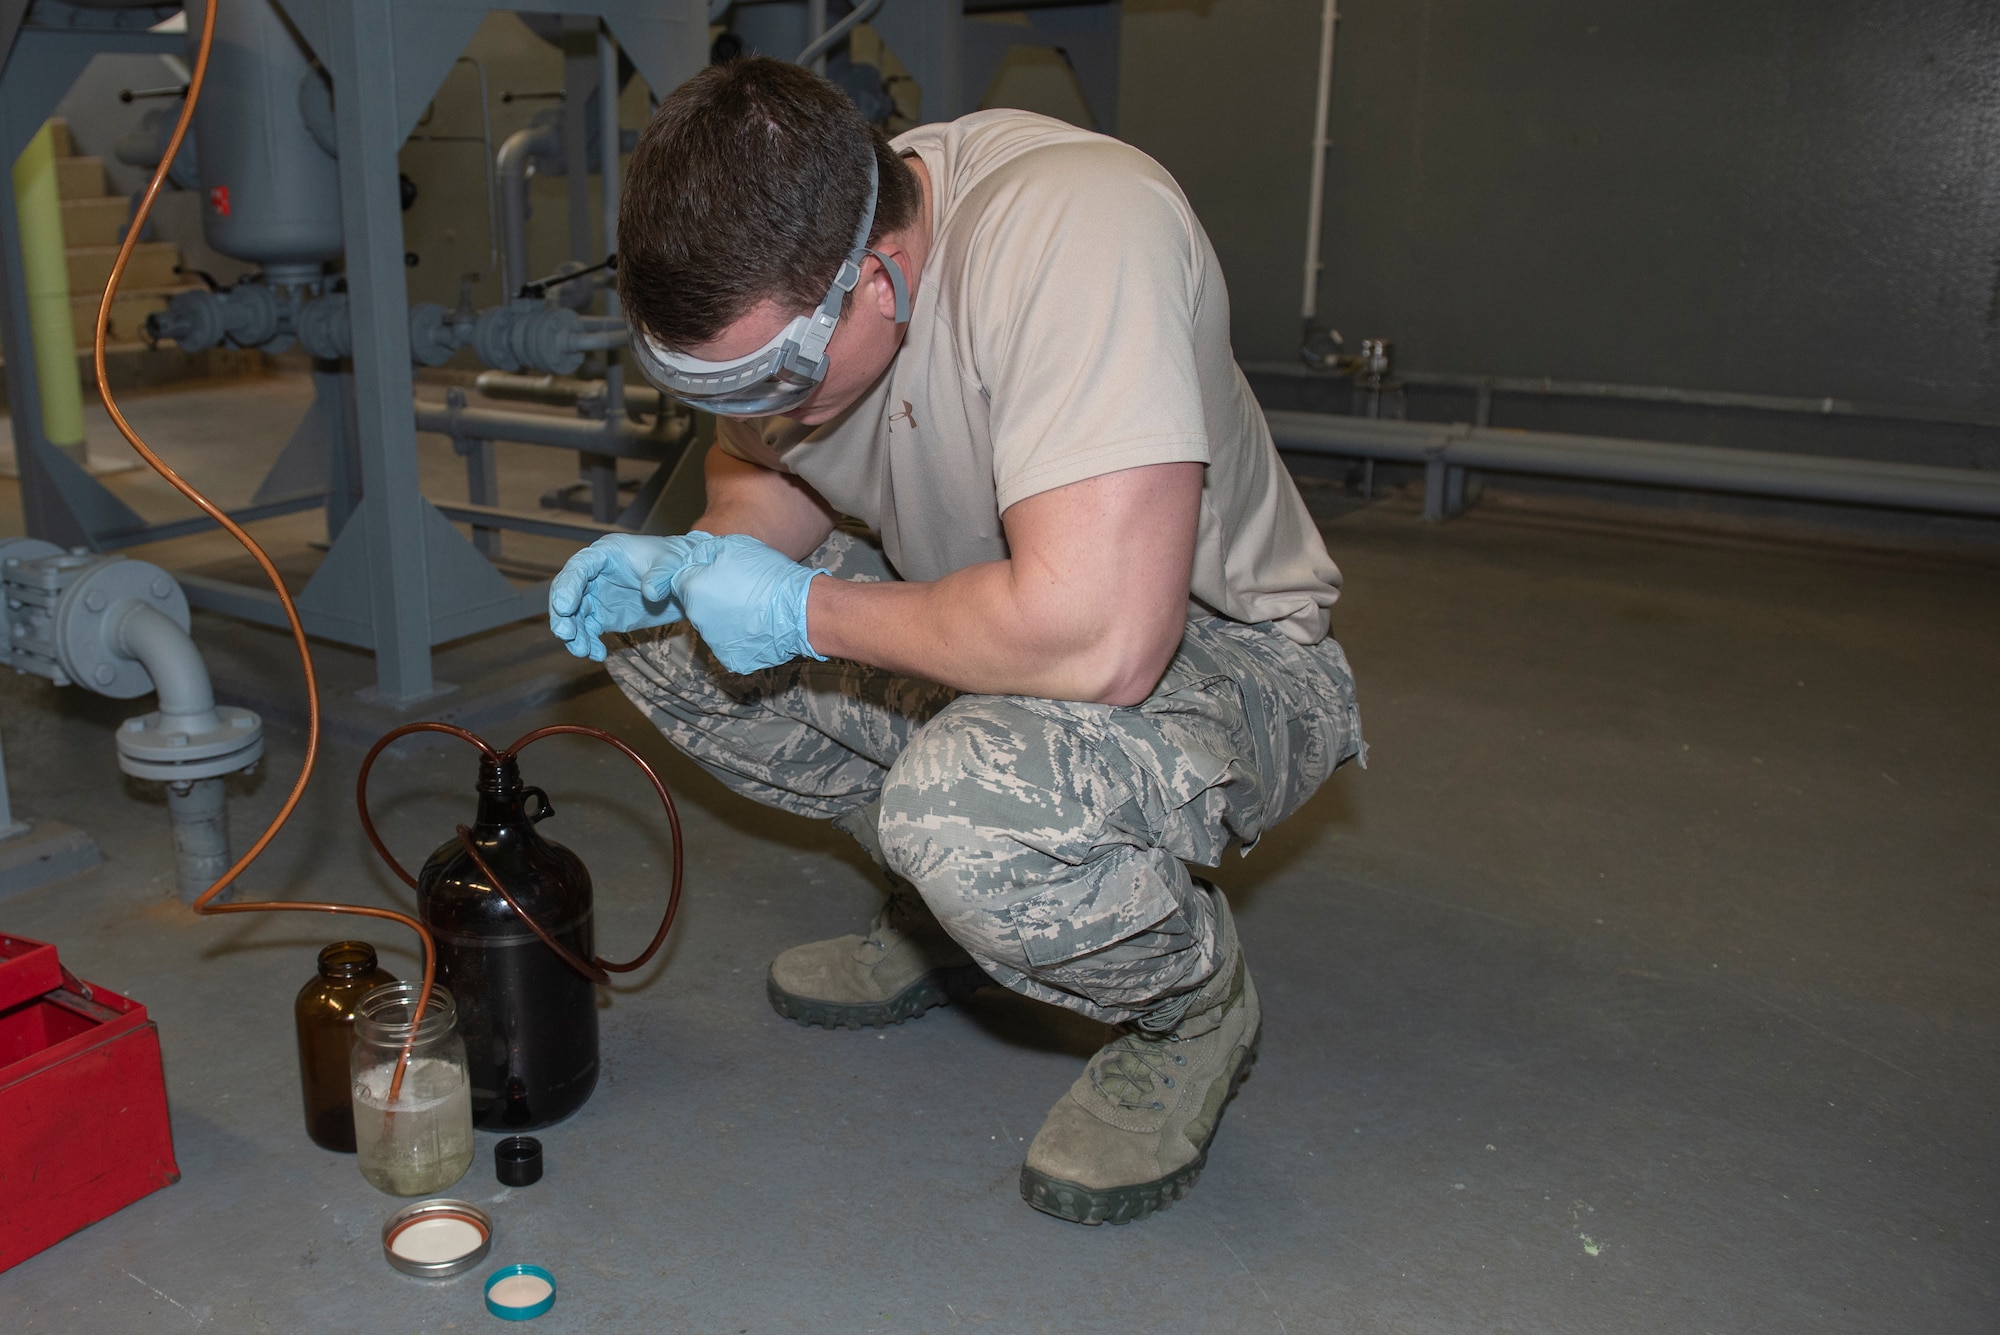 U.S. Air Force Senior Airman Joshua Skroch, 52nd Logistics Readiness Squadron petroleum, oil, and lubricants journeyman, collects a sample of JP-8 fuel for testing at Spangdahlem Air Base, Germany, Oct. 29, 2019. Fuel samples are collected to test for any traces of water or additives. (U.S. Air Force photo by Airman 1st Class Alison Stewart)